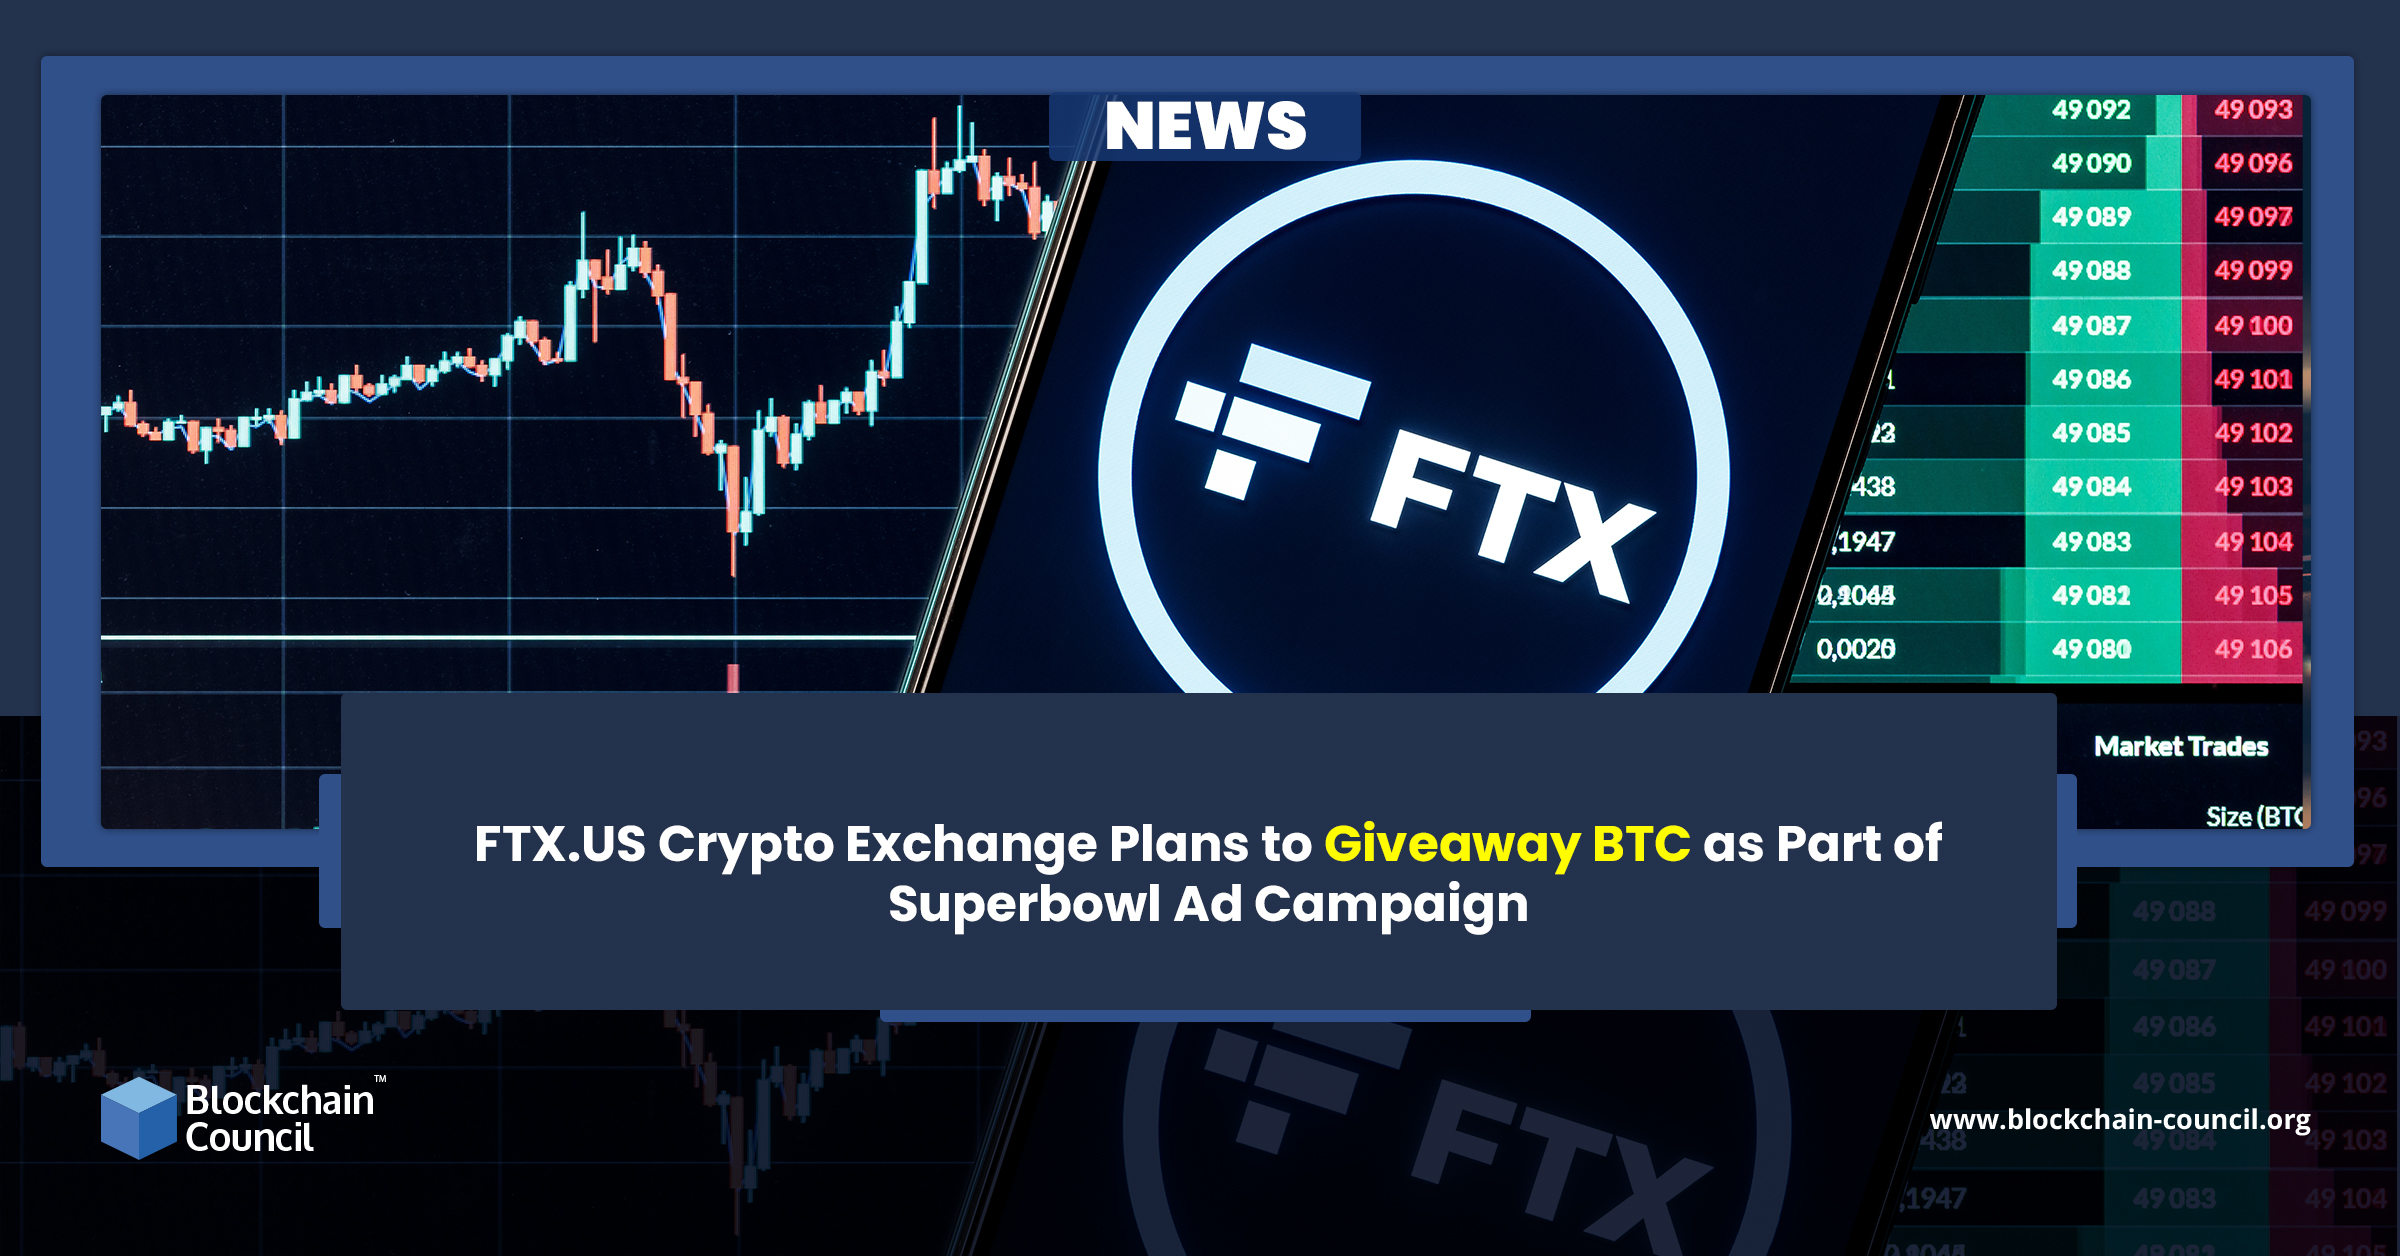 FTX.US Crypto Exchange Plans to Giveaway BTC as Part of Superbowl Ad Campaign